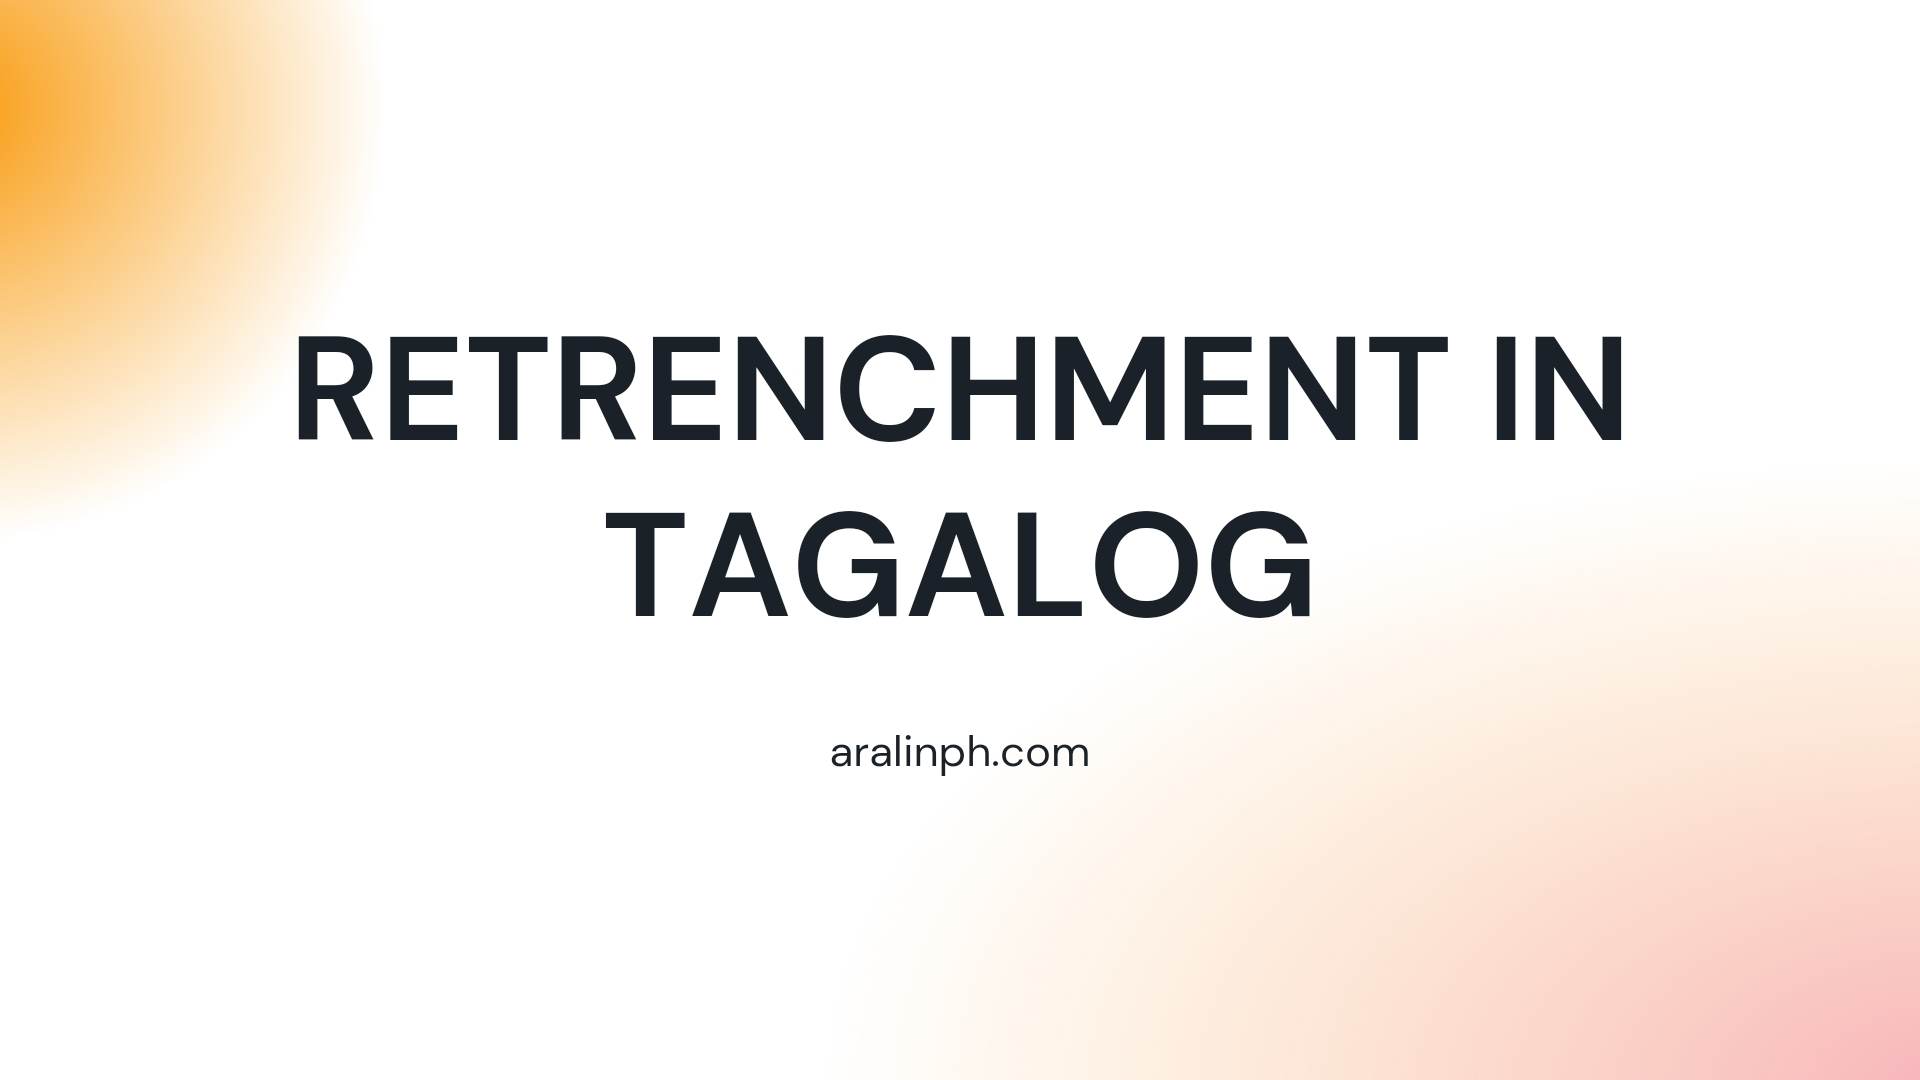 retrenchment in tagalog